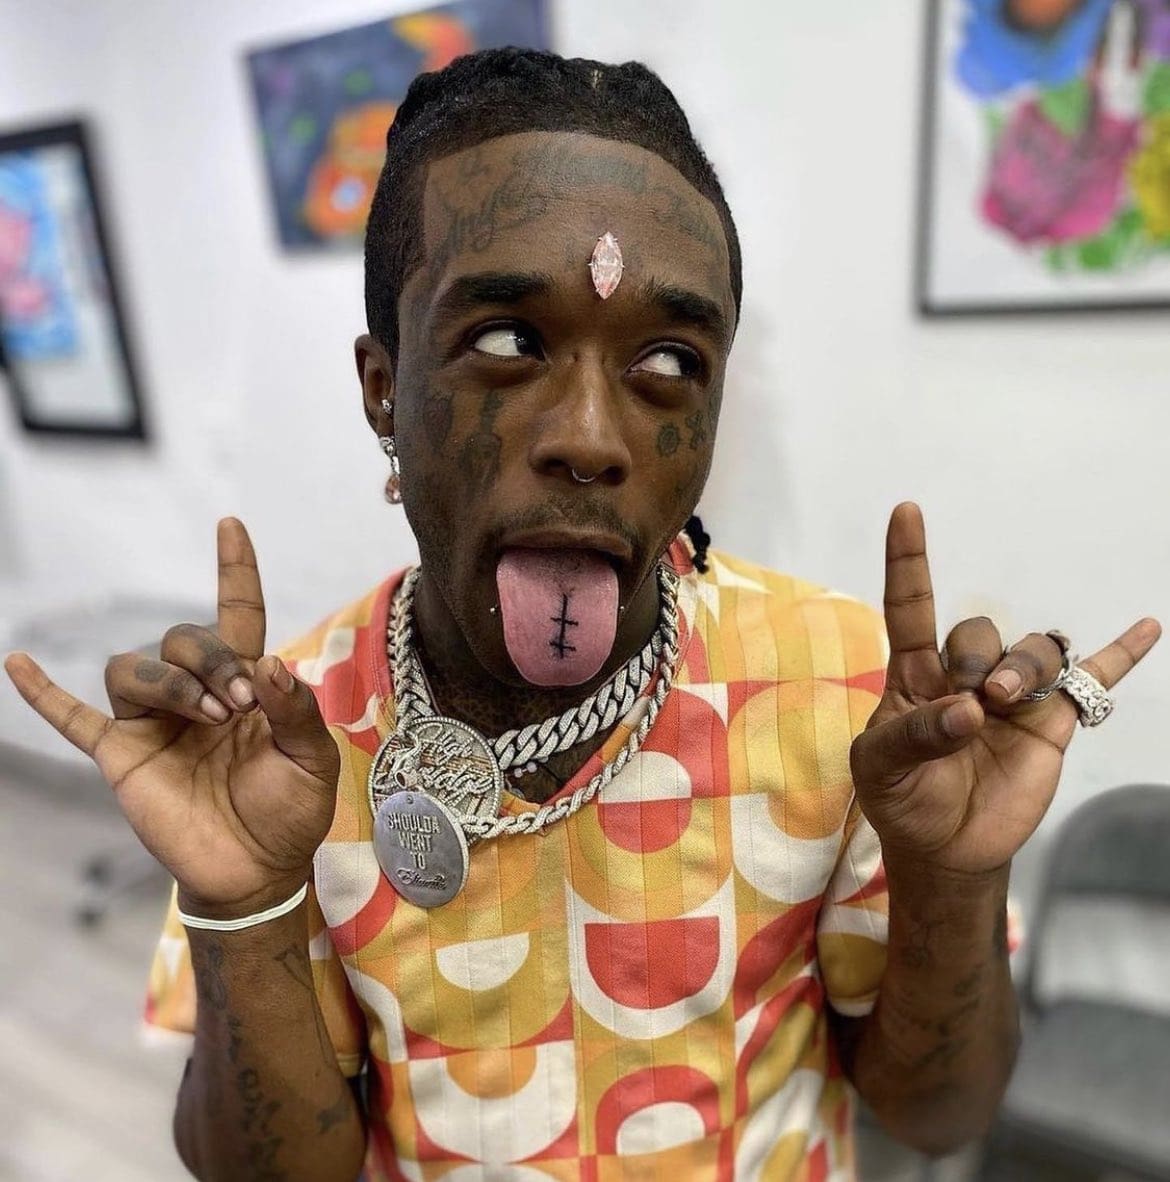 lil-uzi-was-robbed-by-fans-check-out-the-latest-details-about-what-happened